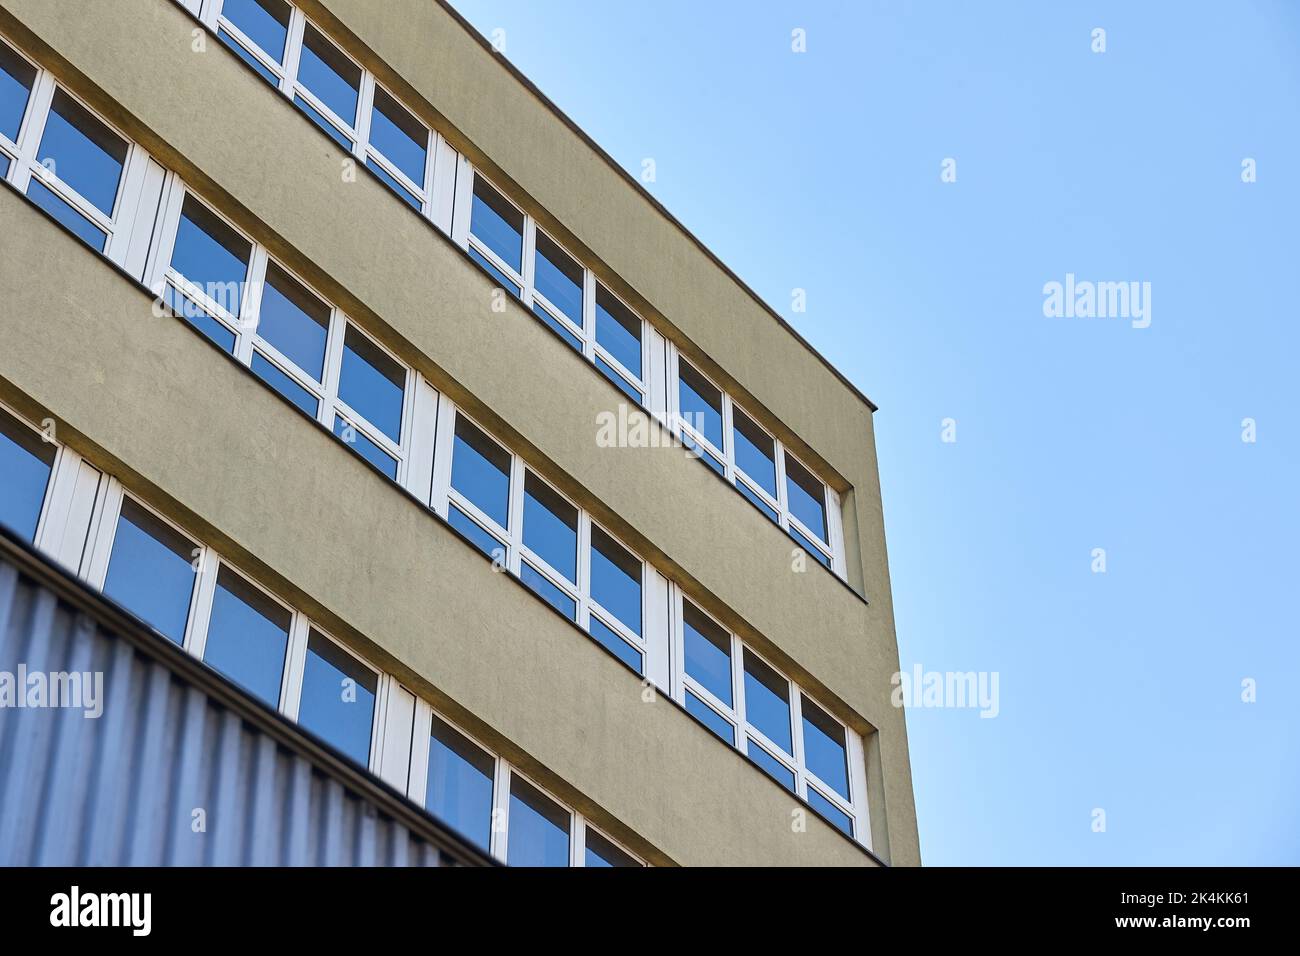 Building detail with windows Stock Photo